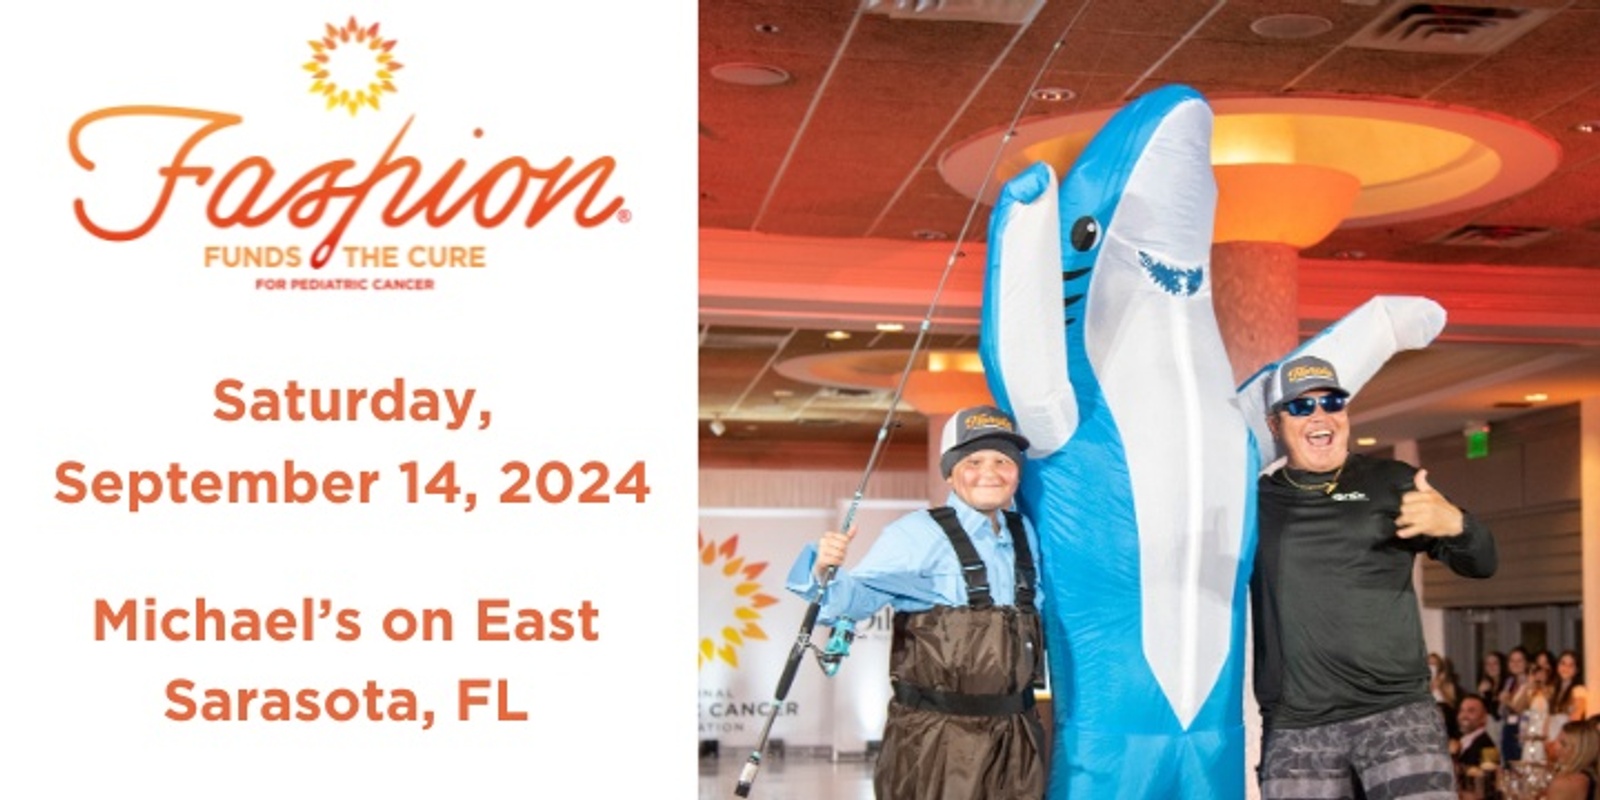 Banner image for National Pediatric Cancer Foundation Fashion Funds the Cure